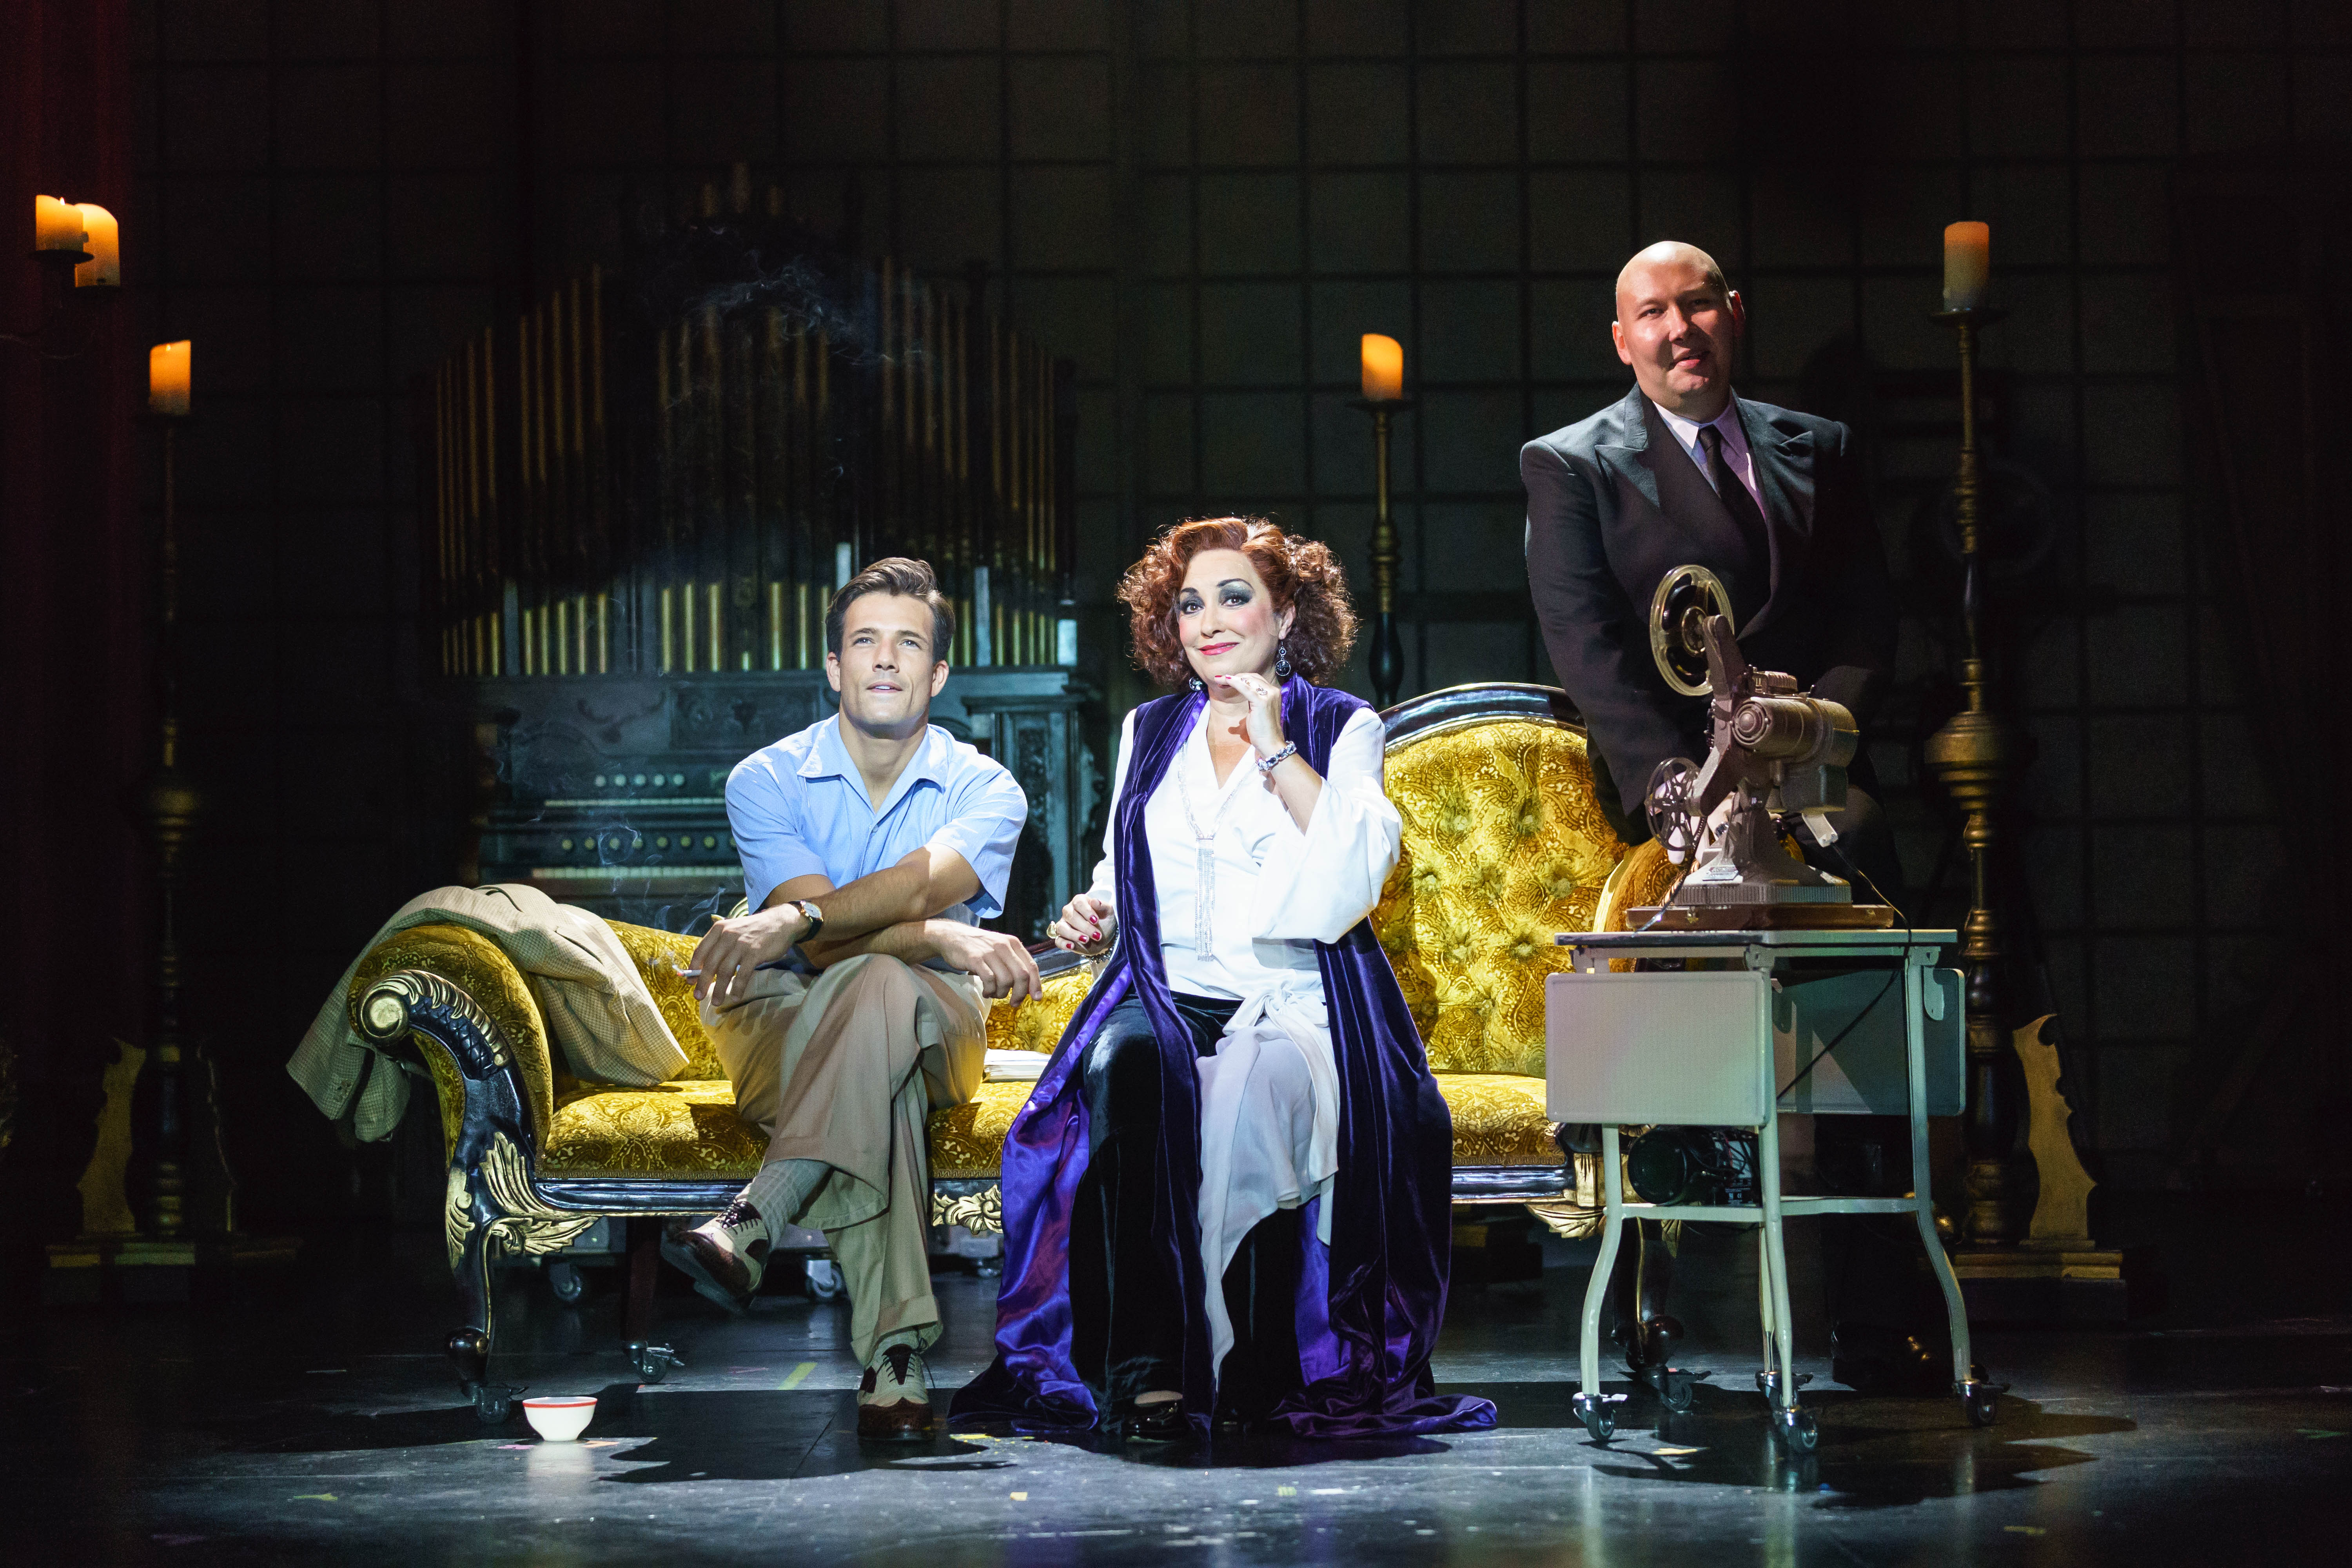 An image from Sunset Boulevard of Danny Mac, Ria Jones sitting on a sofa starring into the distance with Adam Pearce standing close by